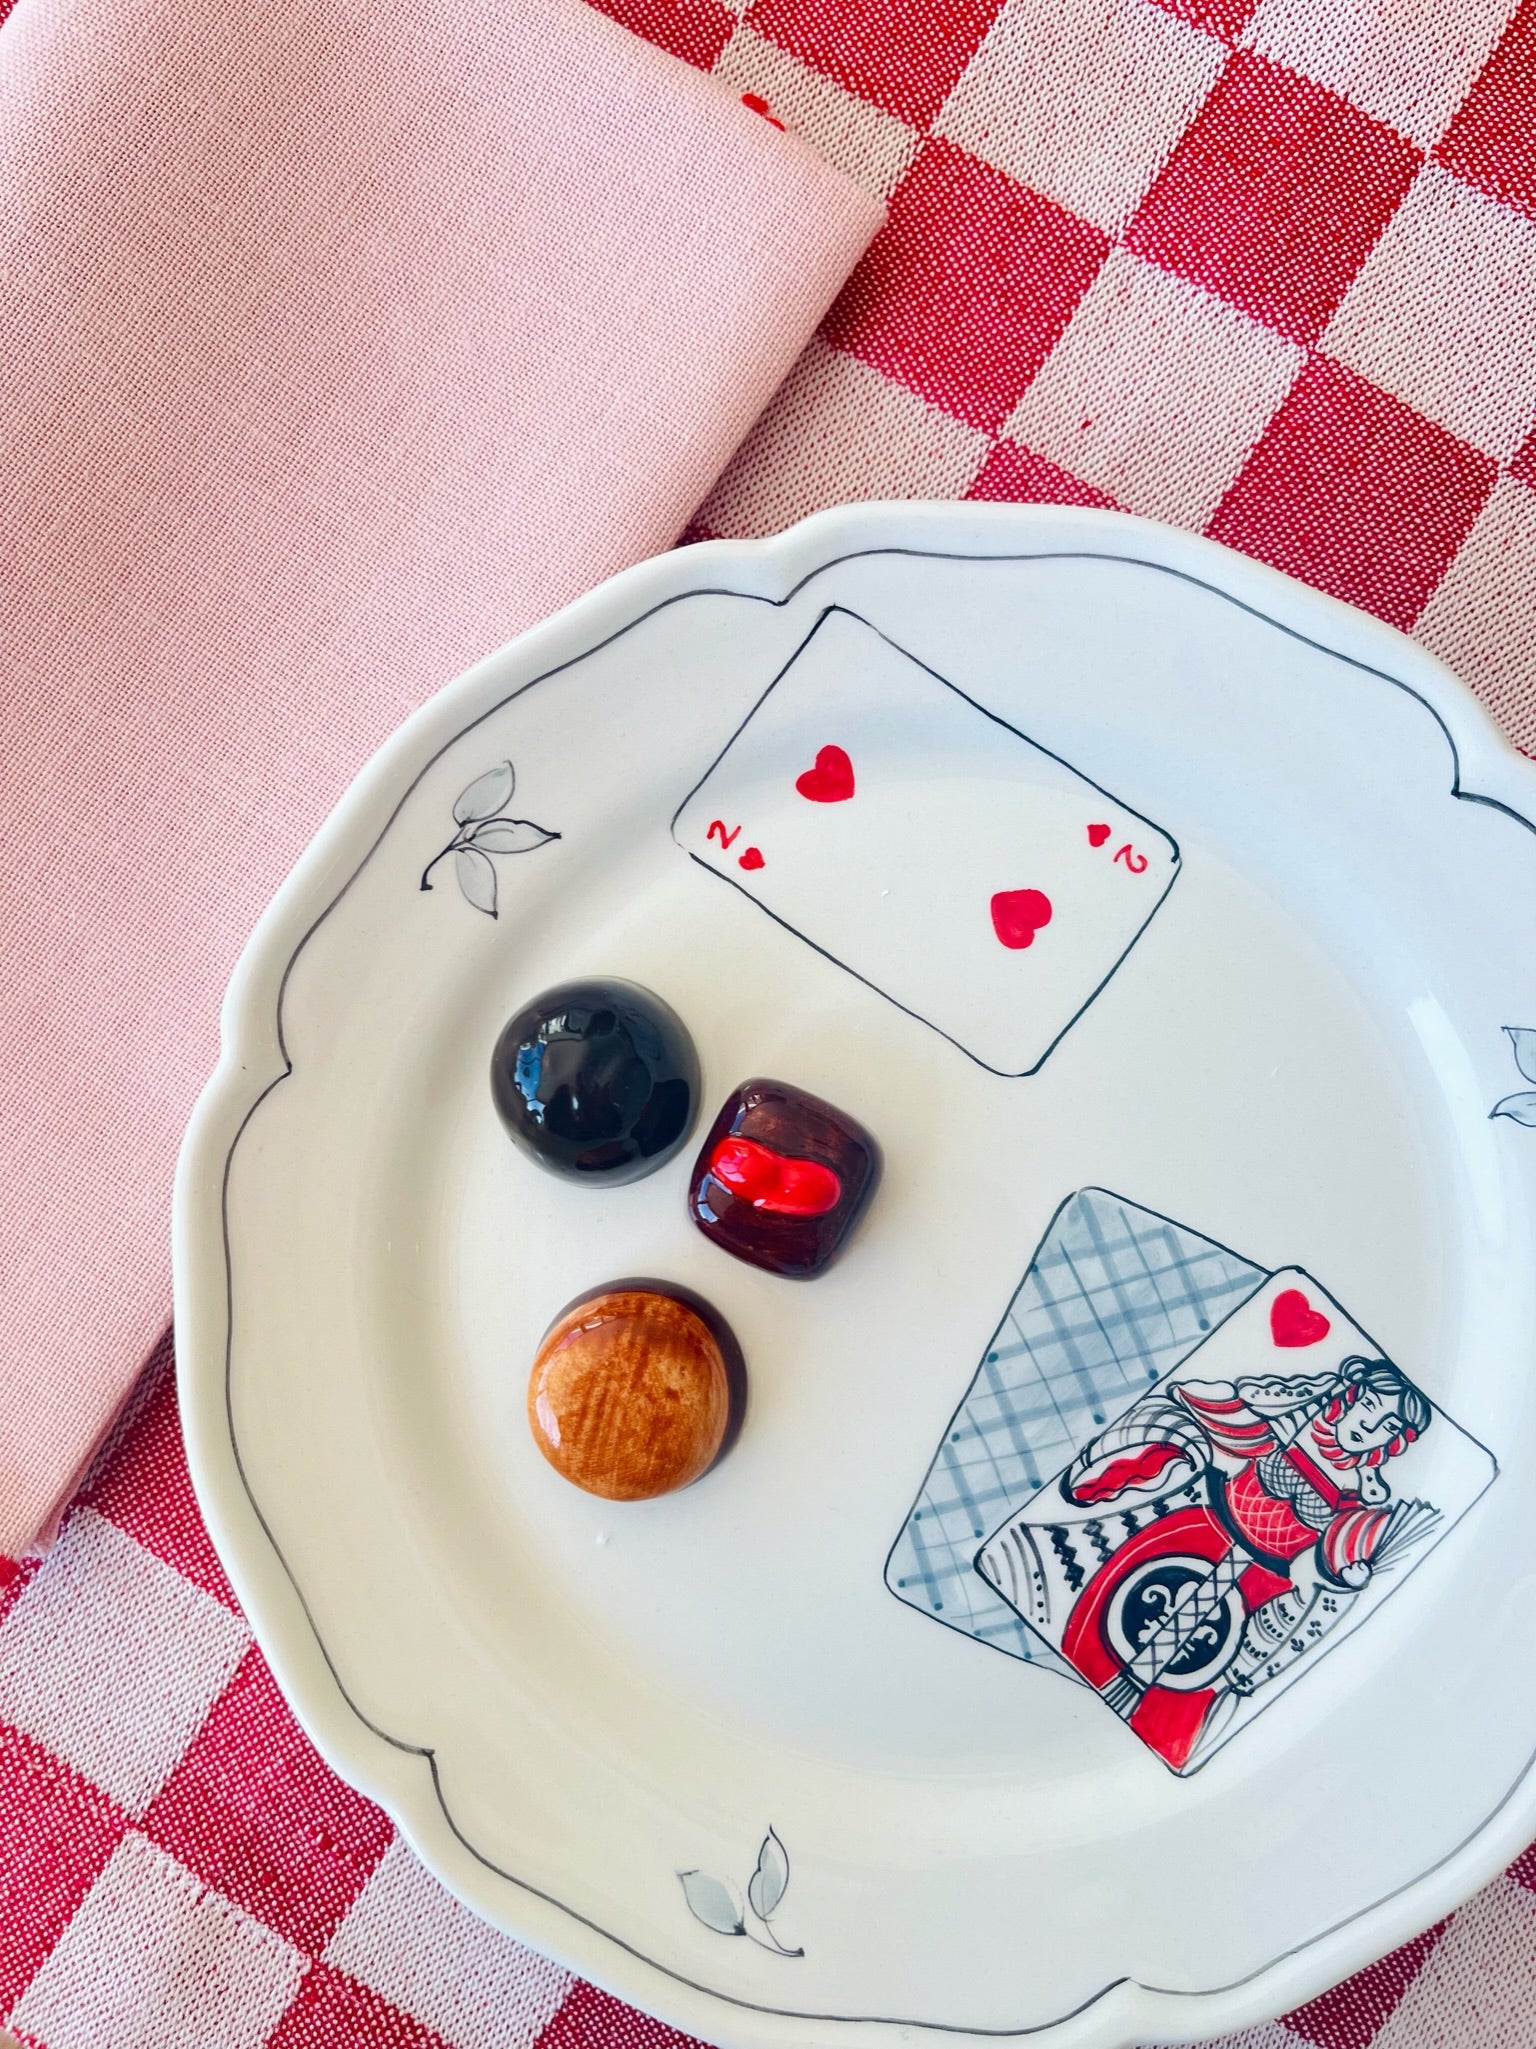 Queen of Table Setting with Hearts Trompe L'œil Plate with Chocolates